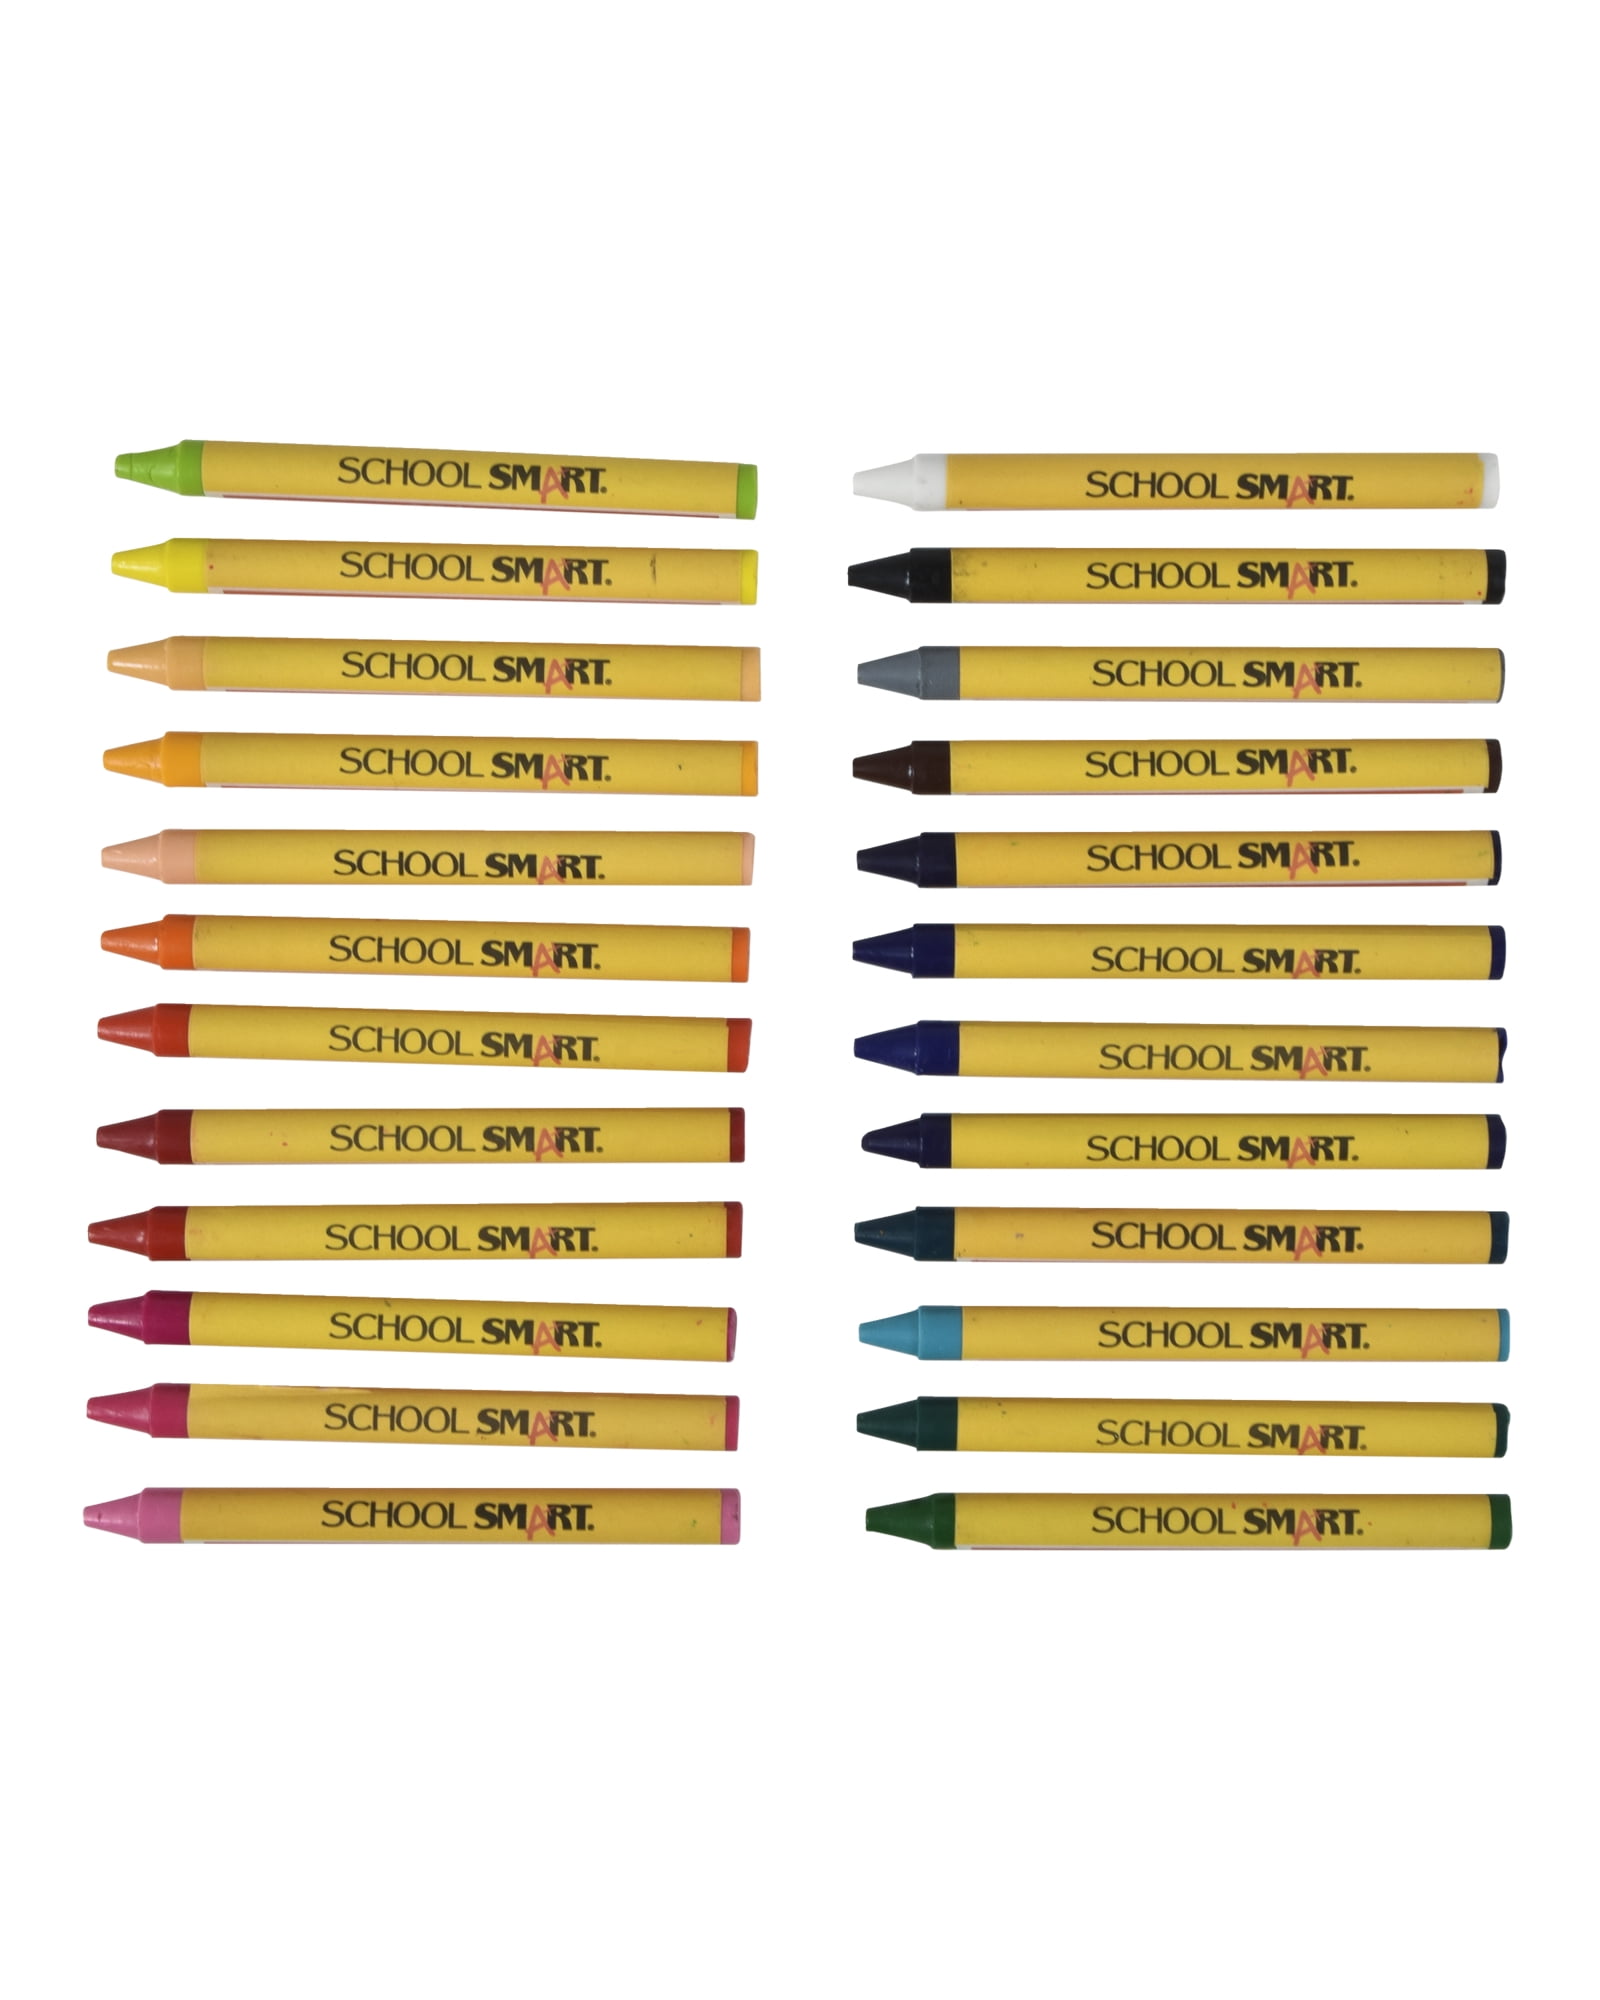 School Smart Non-Toxic Regular Crayon in Tuck Box, 5/16 x 3-1/2 in, Assorted Color, Pack of 24